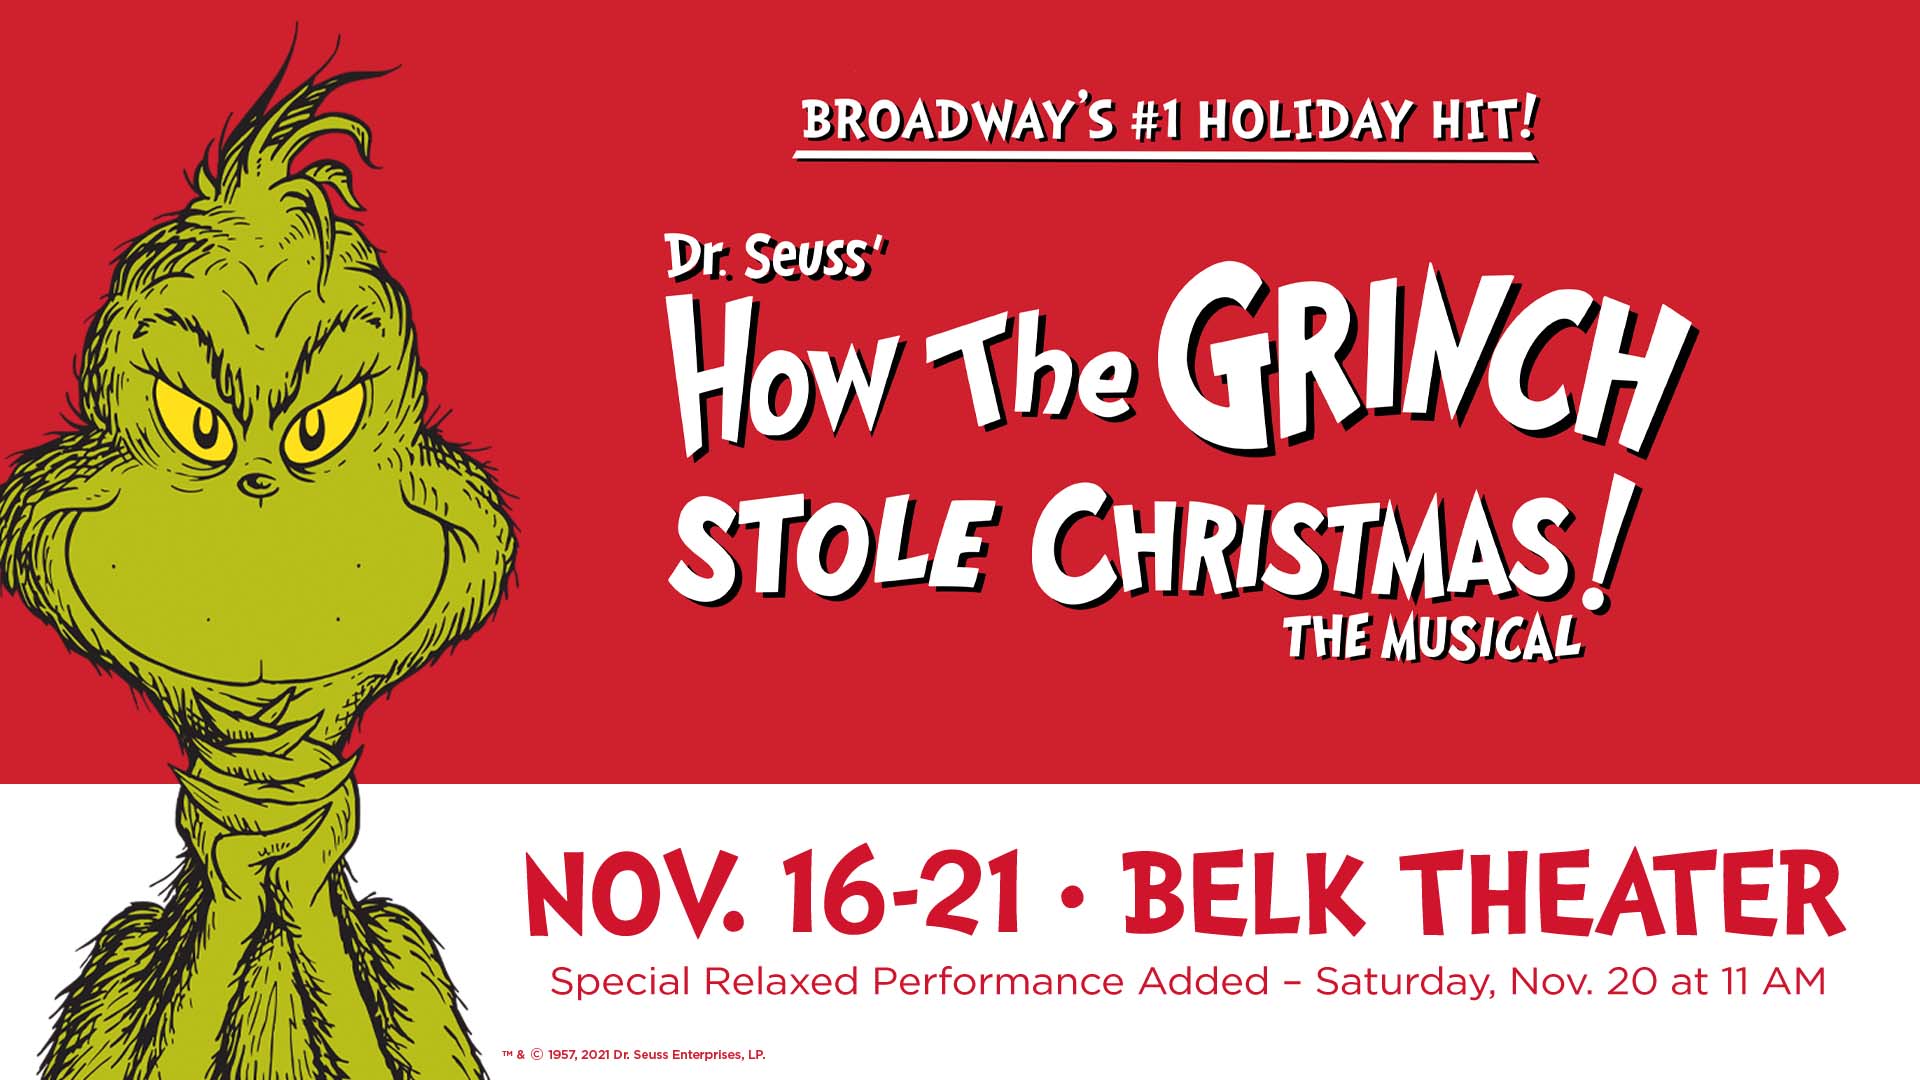 More Info for New RELAXED Performance at The Grinch Helps Open the Doors  for More People to Enjoy Live Theater